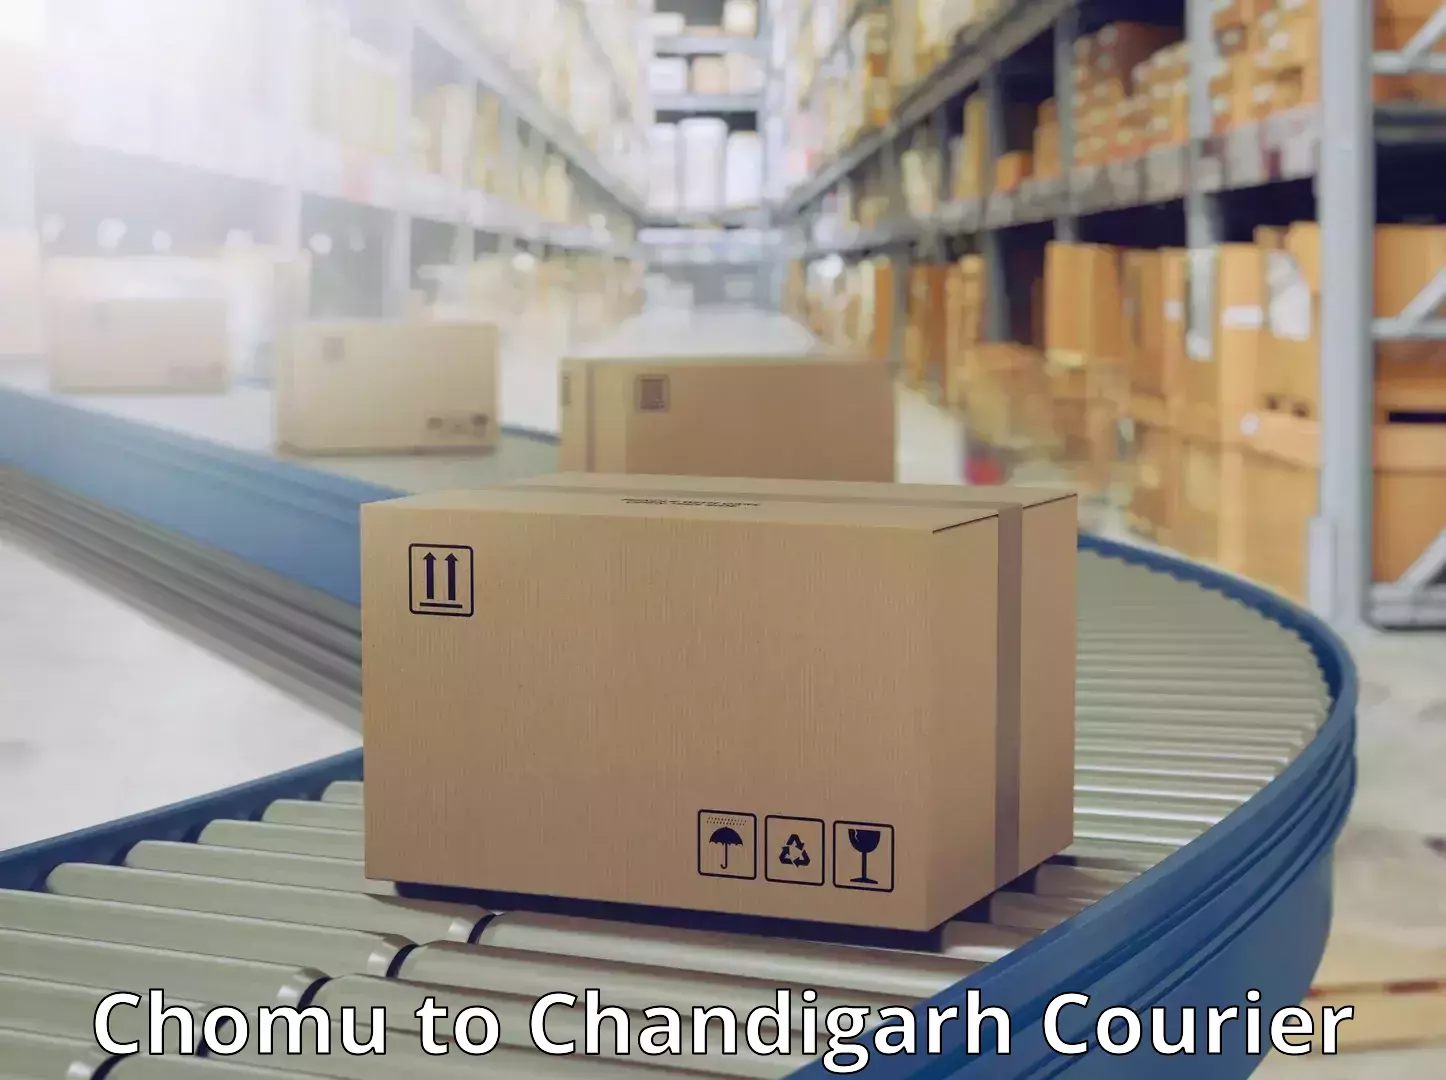 Modern courier technology in Chomu to Chandigarh